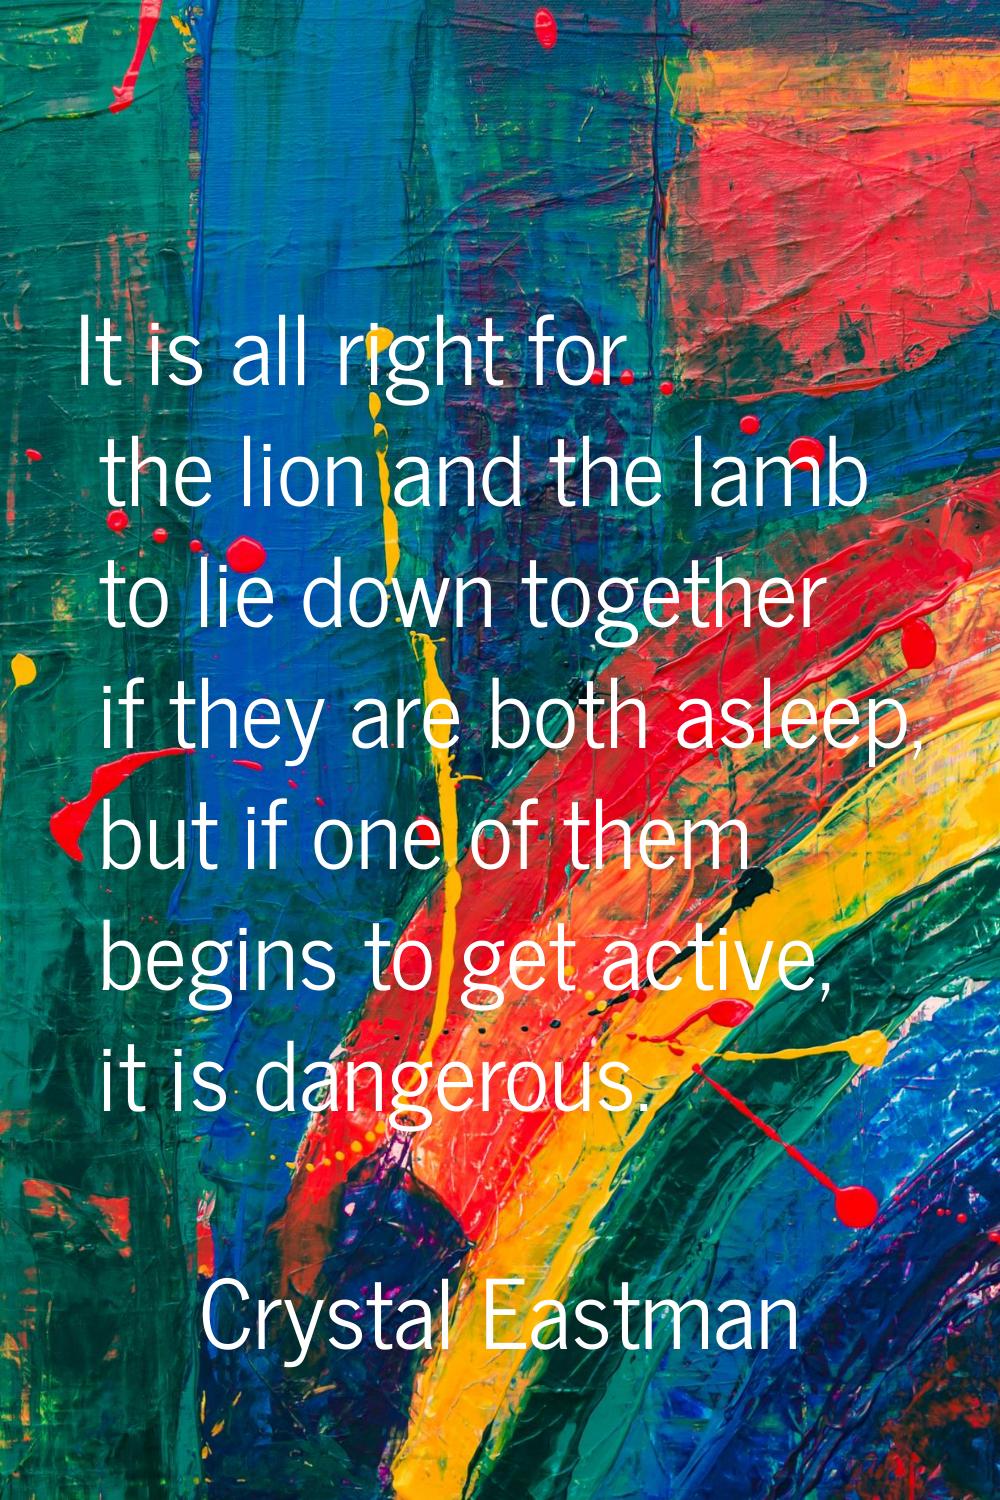 It is all right for the lion and the lamb to lie down together if they are both asleep, but if one 